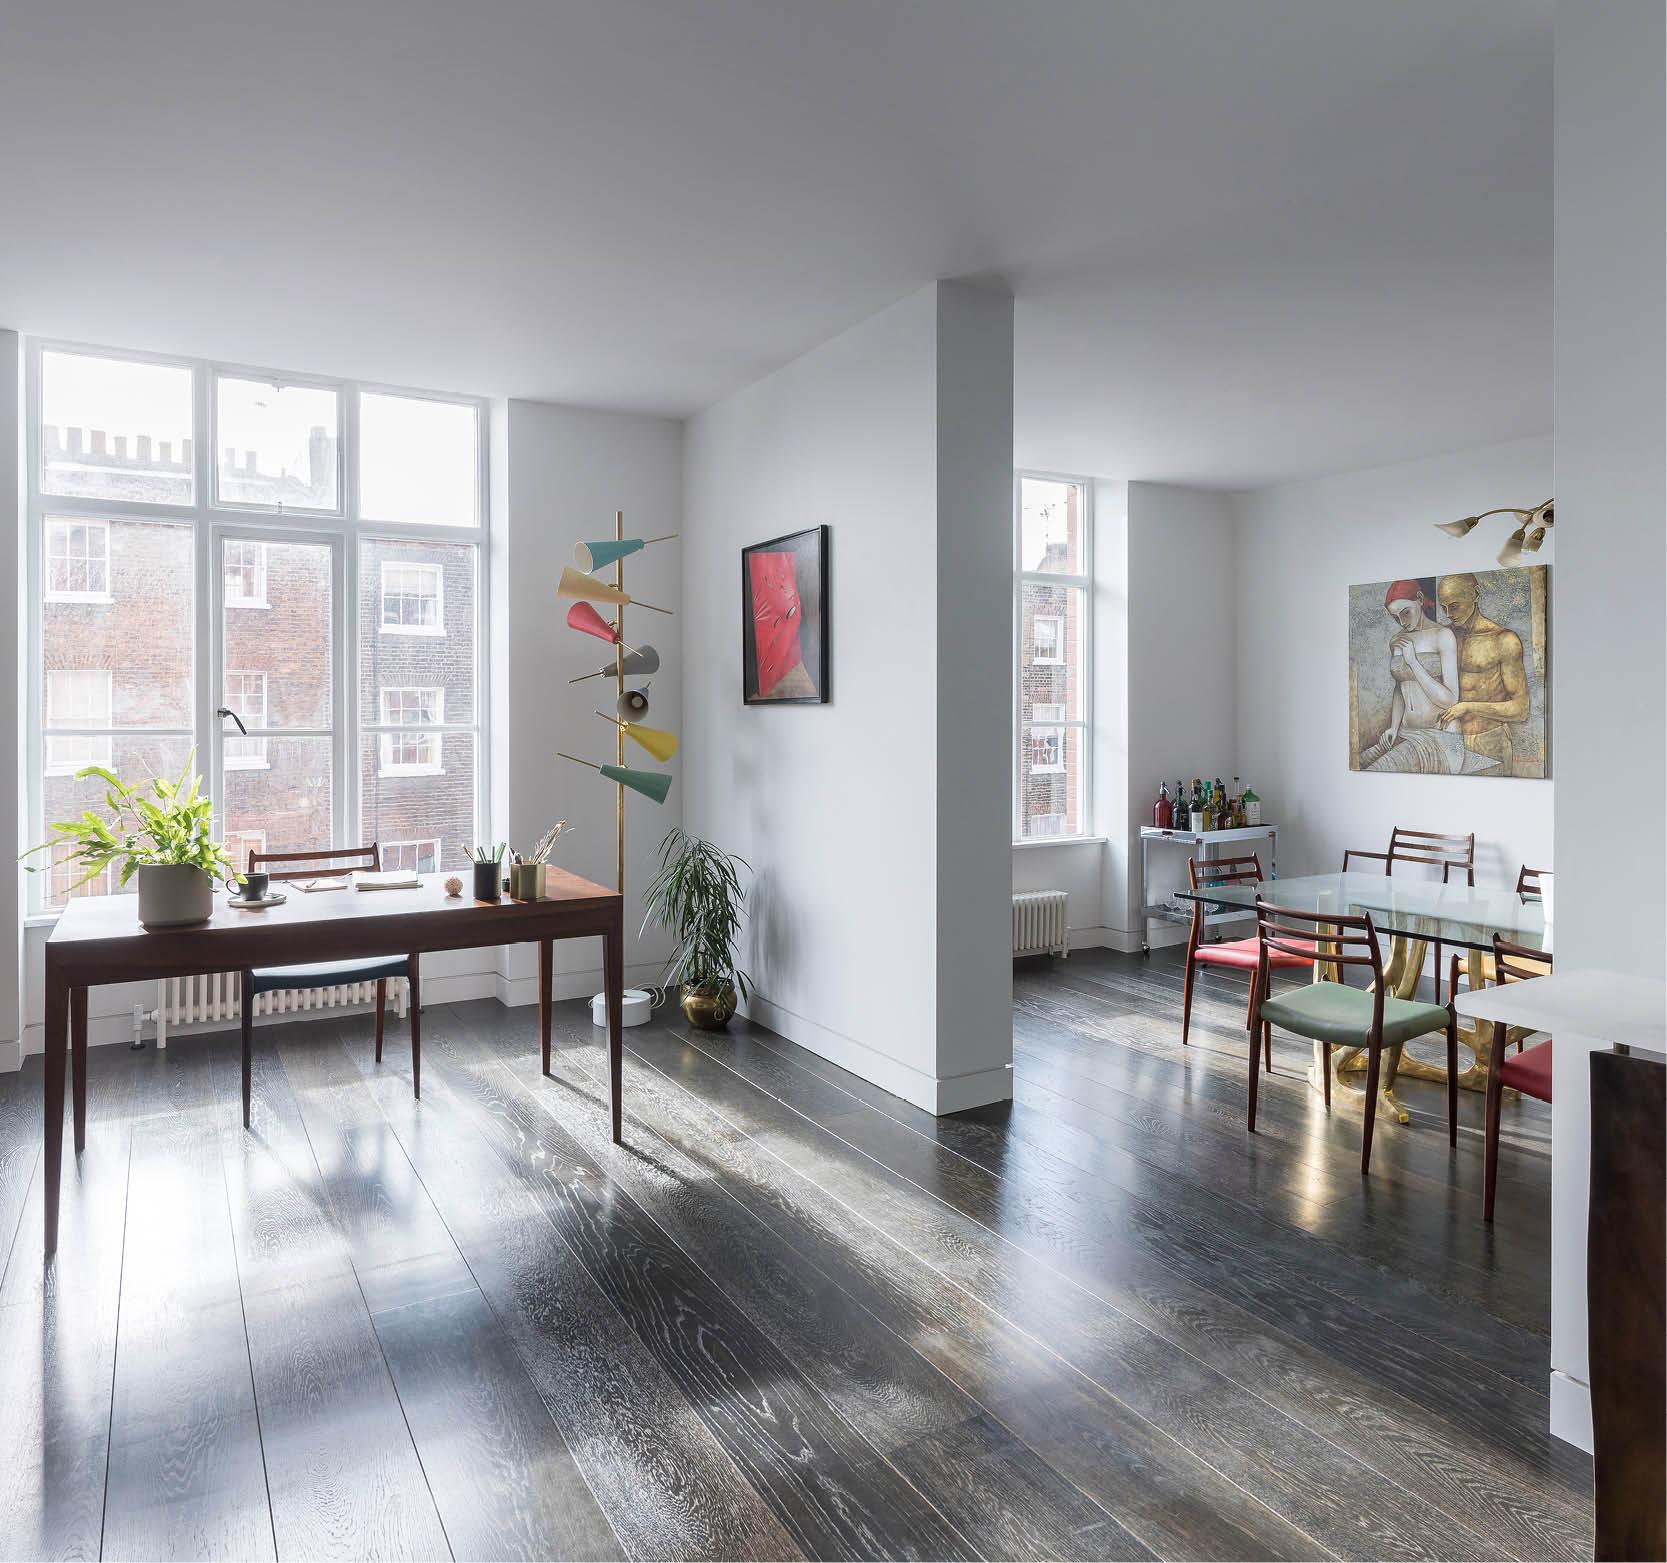 This Refurbished Victorian London Flat Showcases an Extensive Art Collection